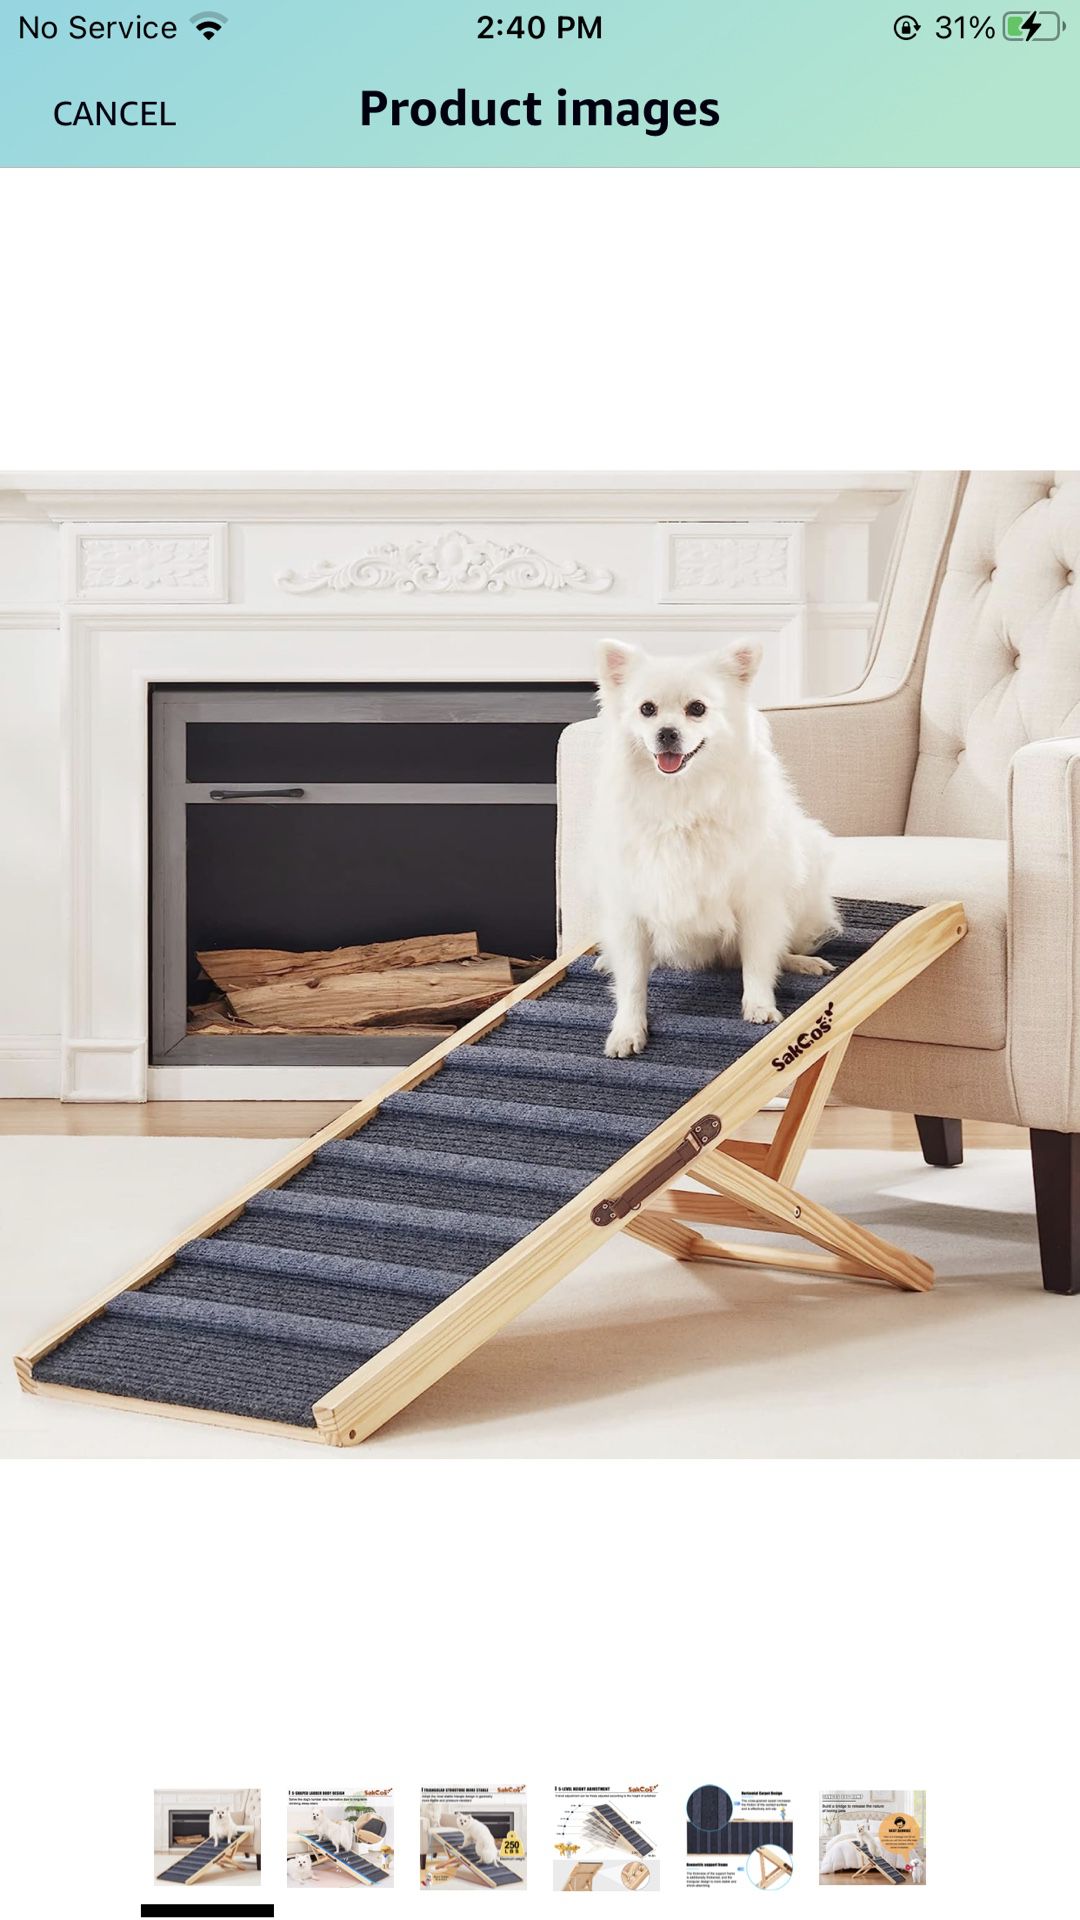 Sakgos Dog Ramp for Bed, Adjustable Pet Ramp for Couch, Dog Ramp for High Bed, Wooden Folding Portable Dog Cat Bed Ramp for Bed and Car, Non Slip Carp